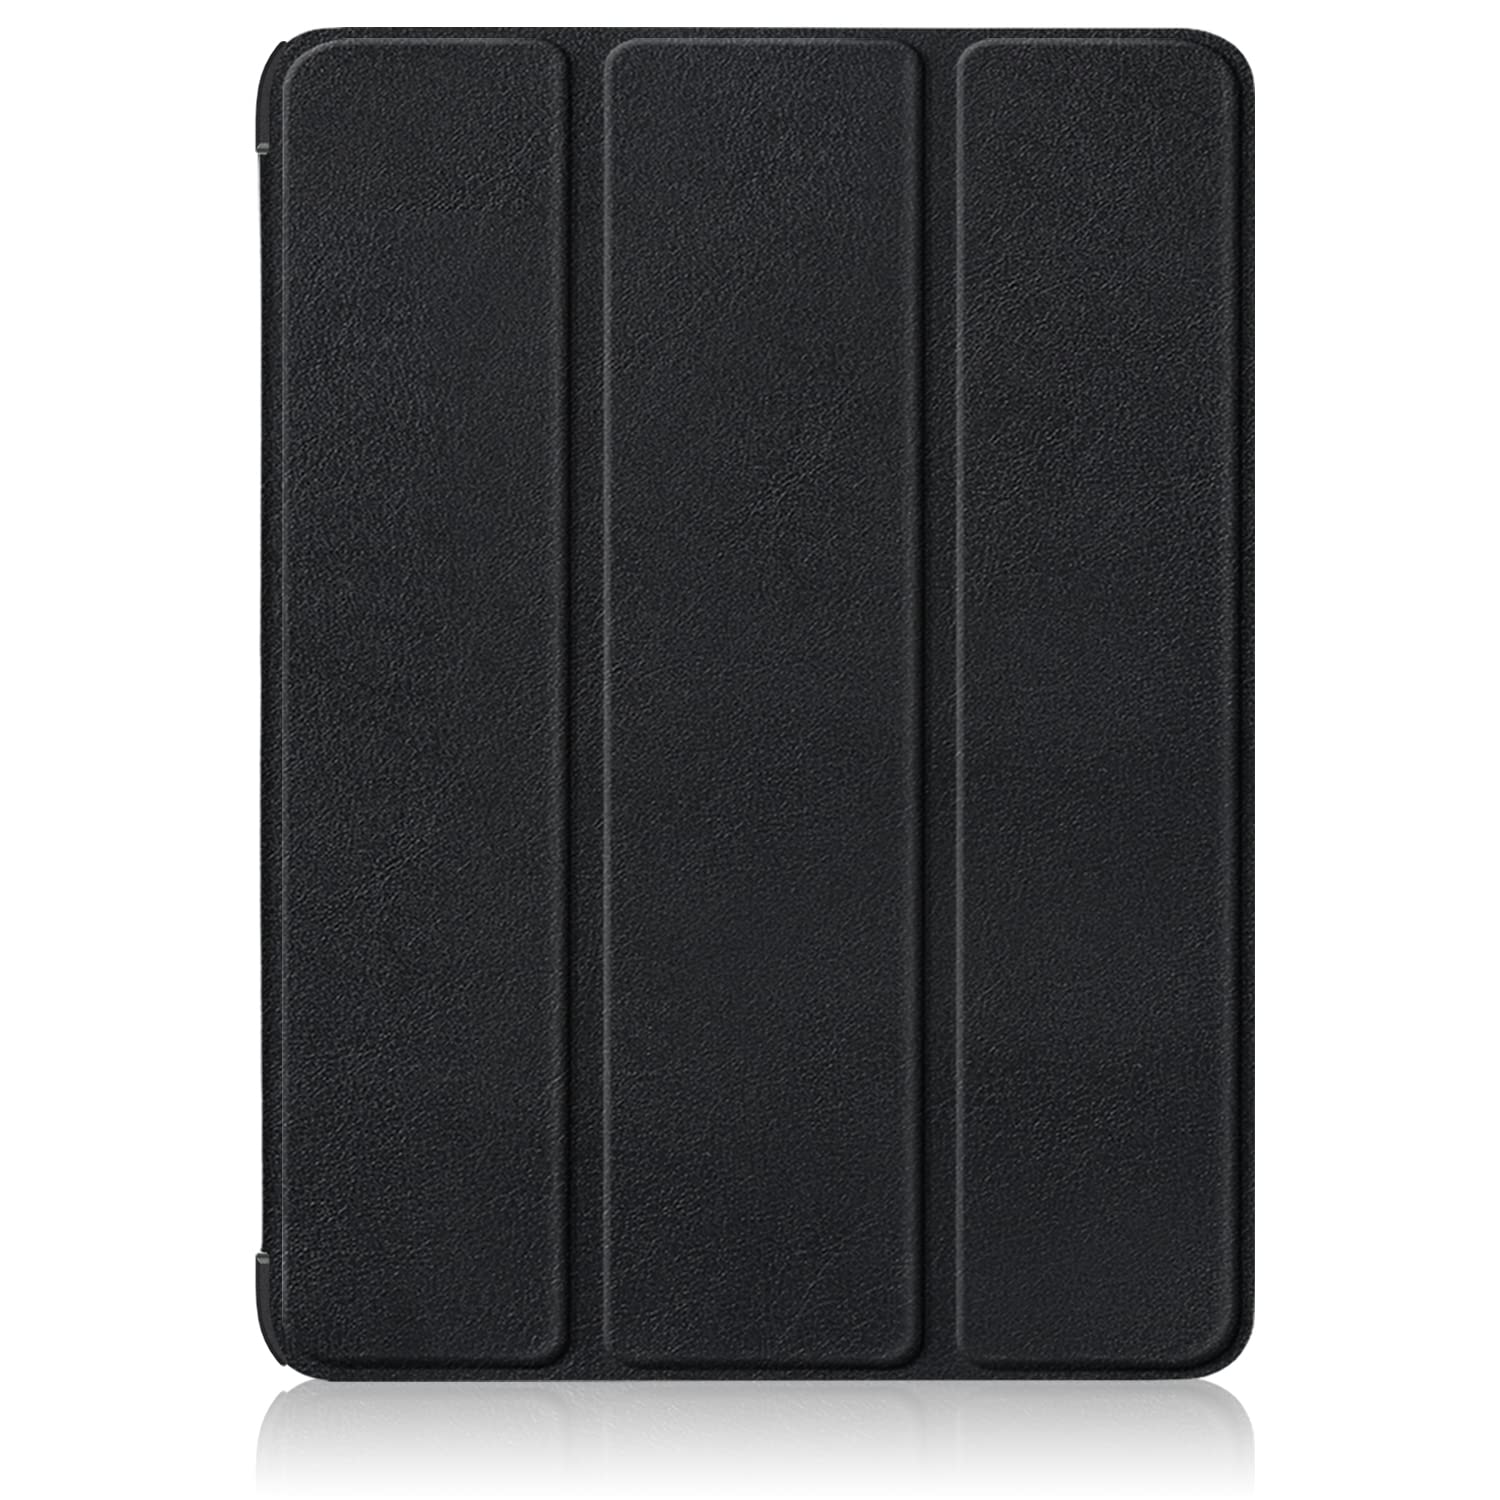 Gylint Case for OnePlus Pad 2023, Folding Folio Ultra-Thin PU Leather Stand Case Cover for OnePlus Pad/Oppo Pad 2 Black